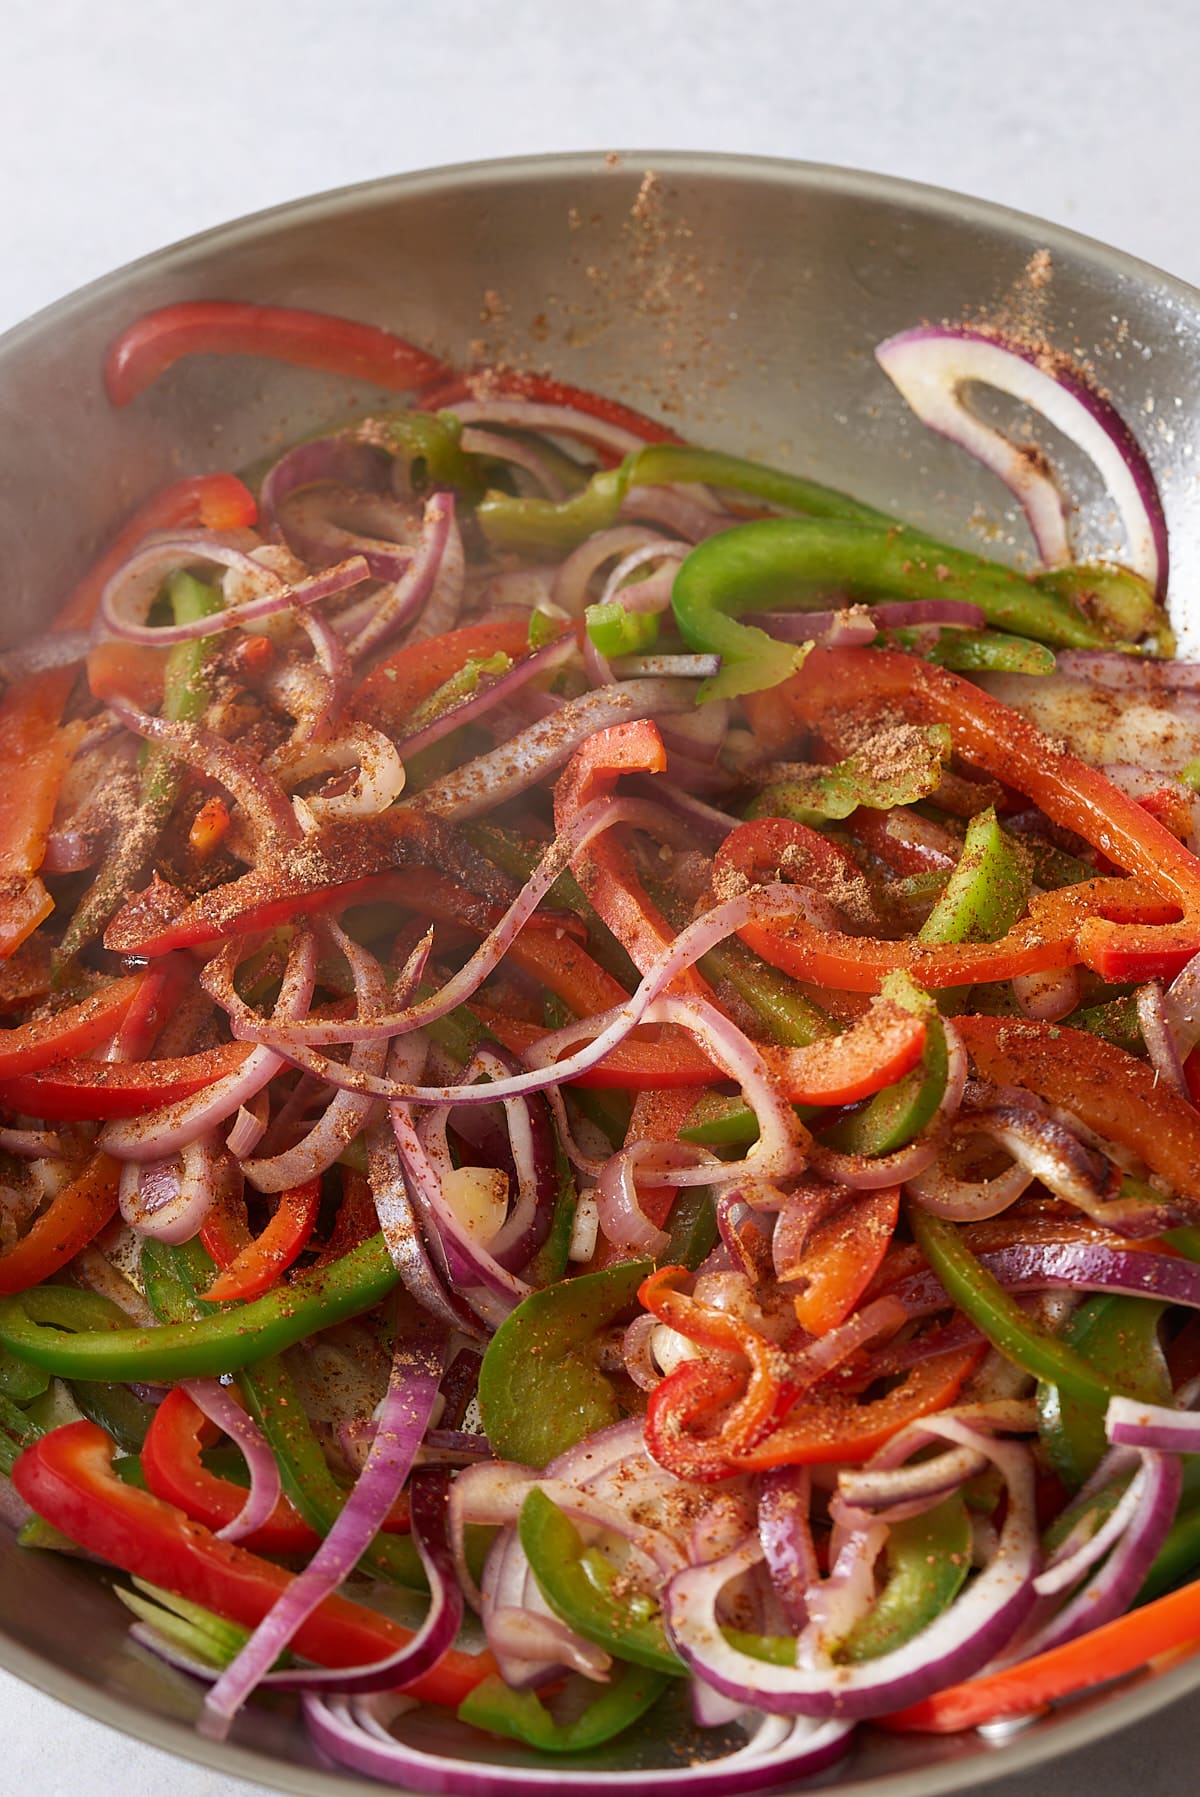 Sliced red onion and red and green bell peppers coated in fajitas seasoning, cooking in a large frying pan.